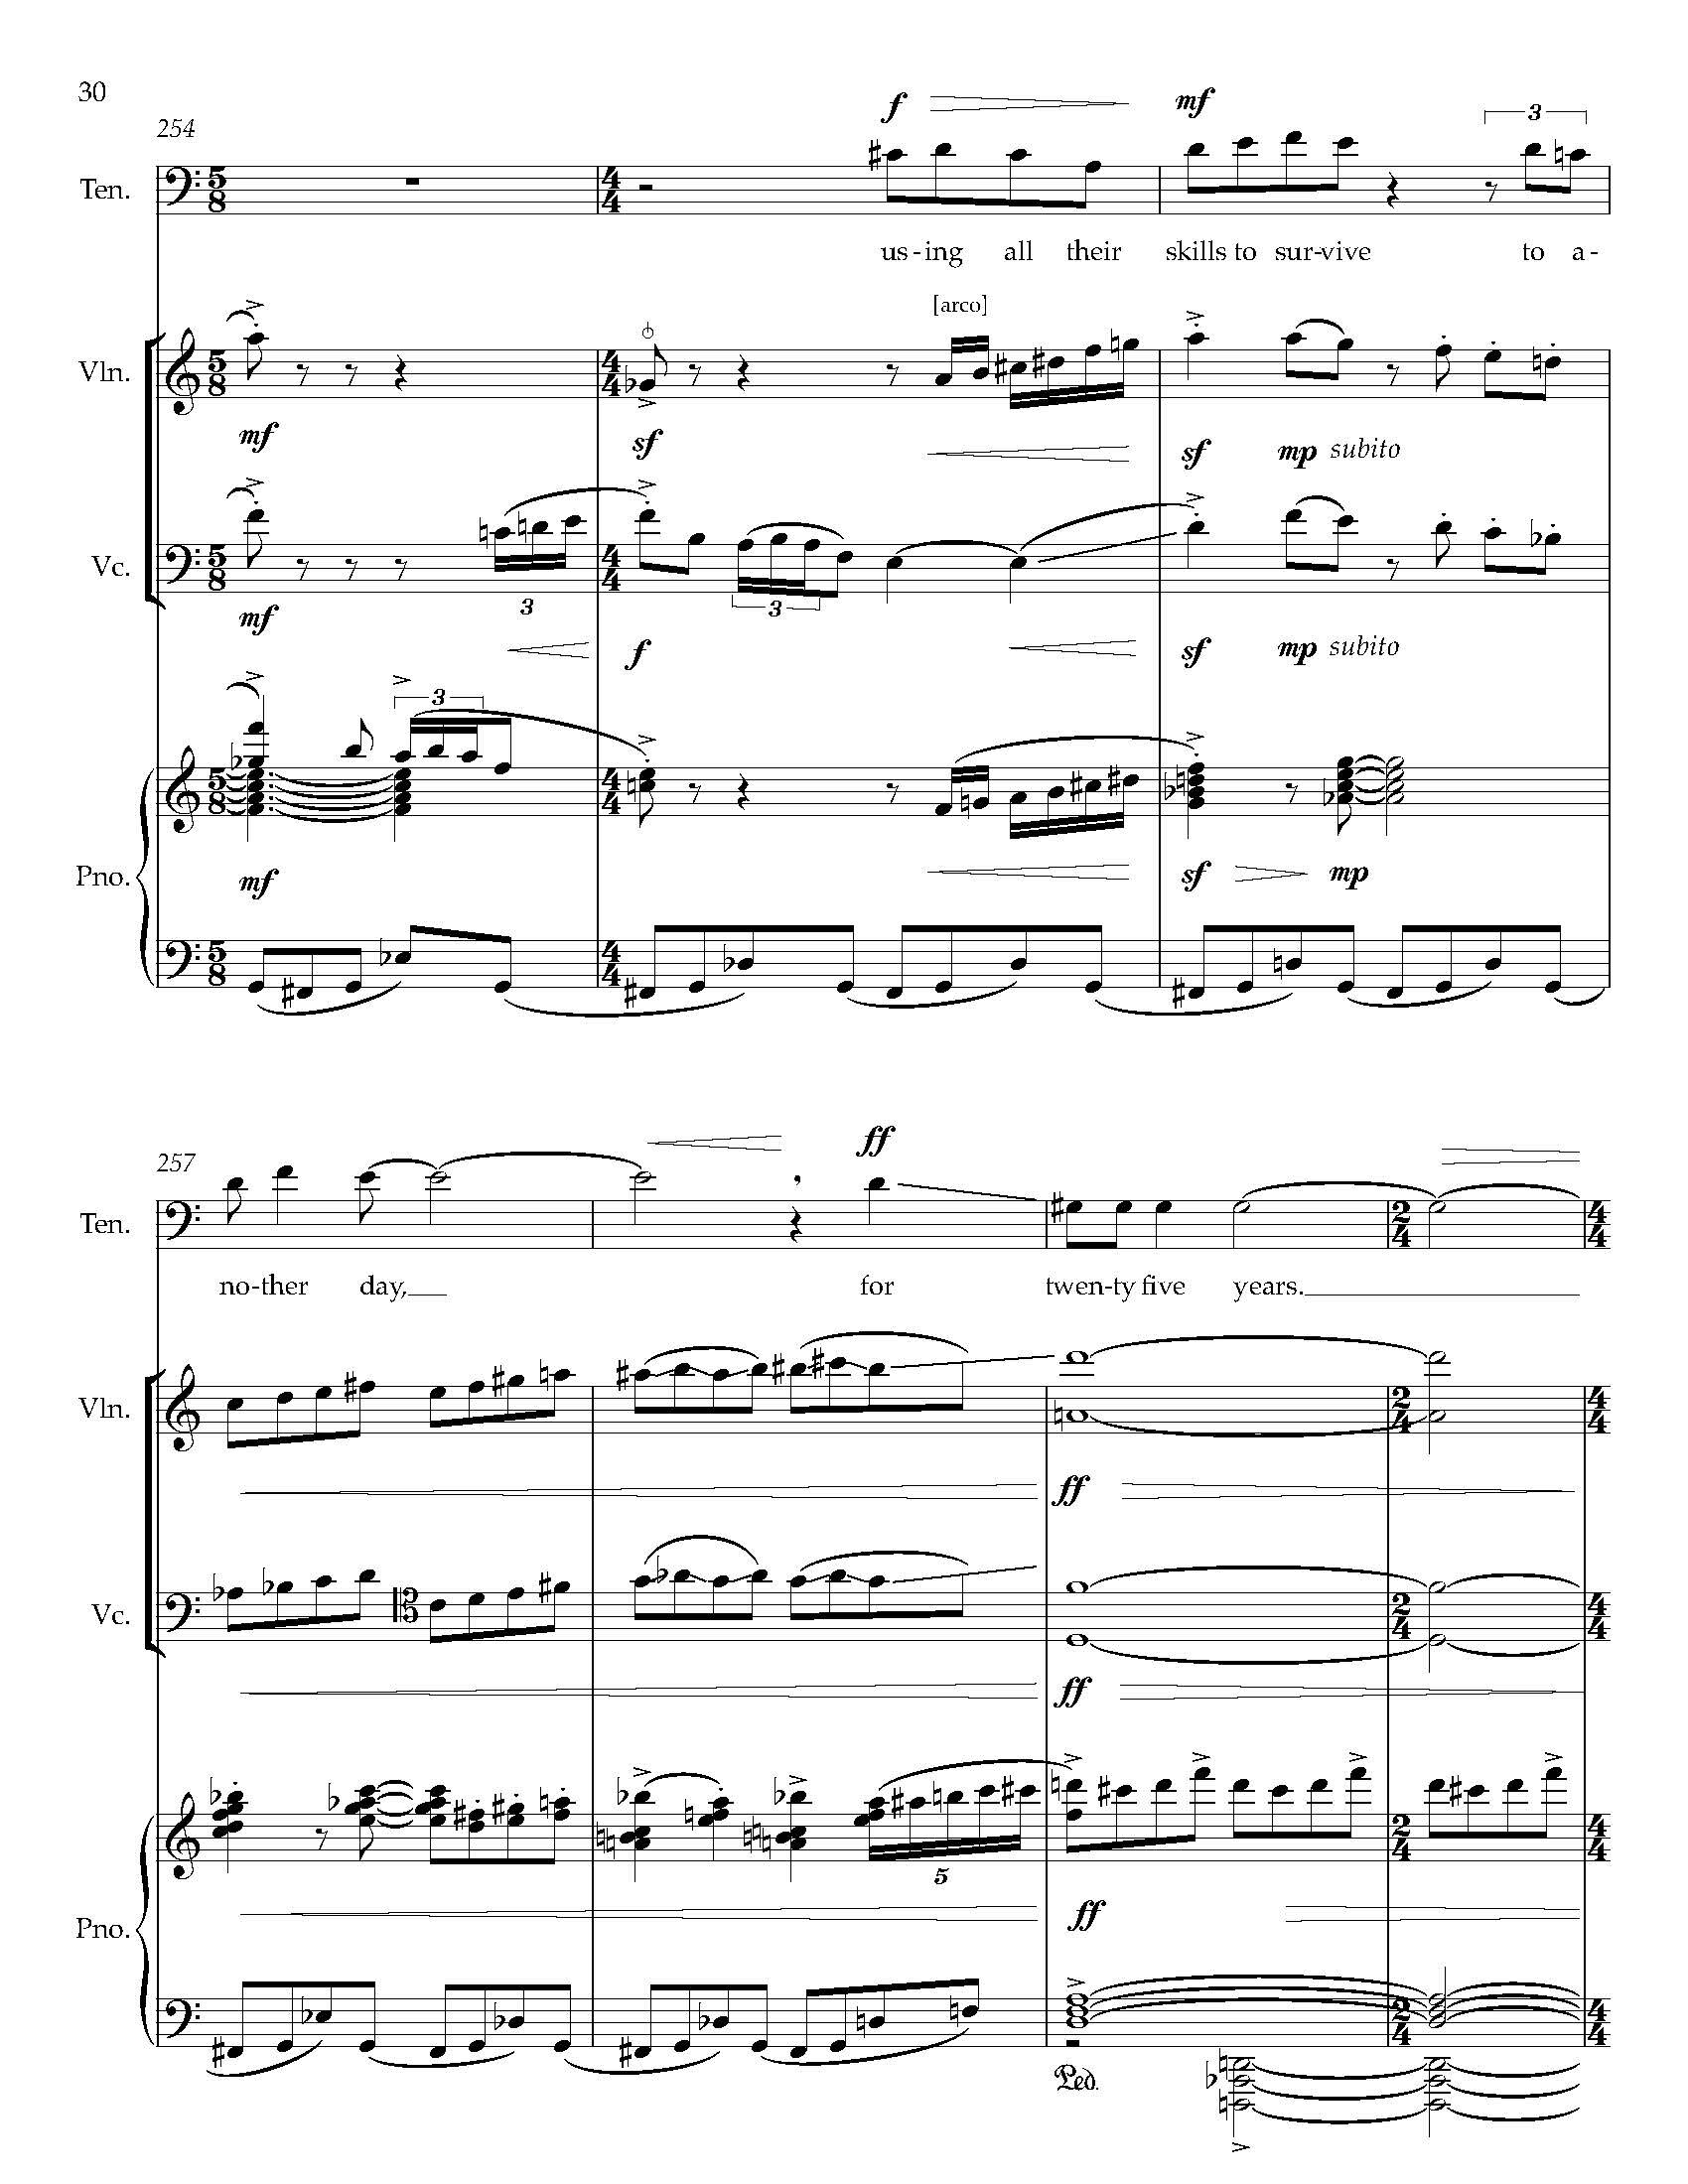 Gursky Songs - Complete Score_Page_38.jpg